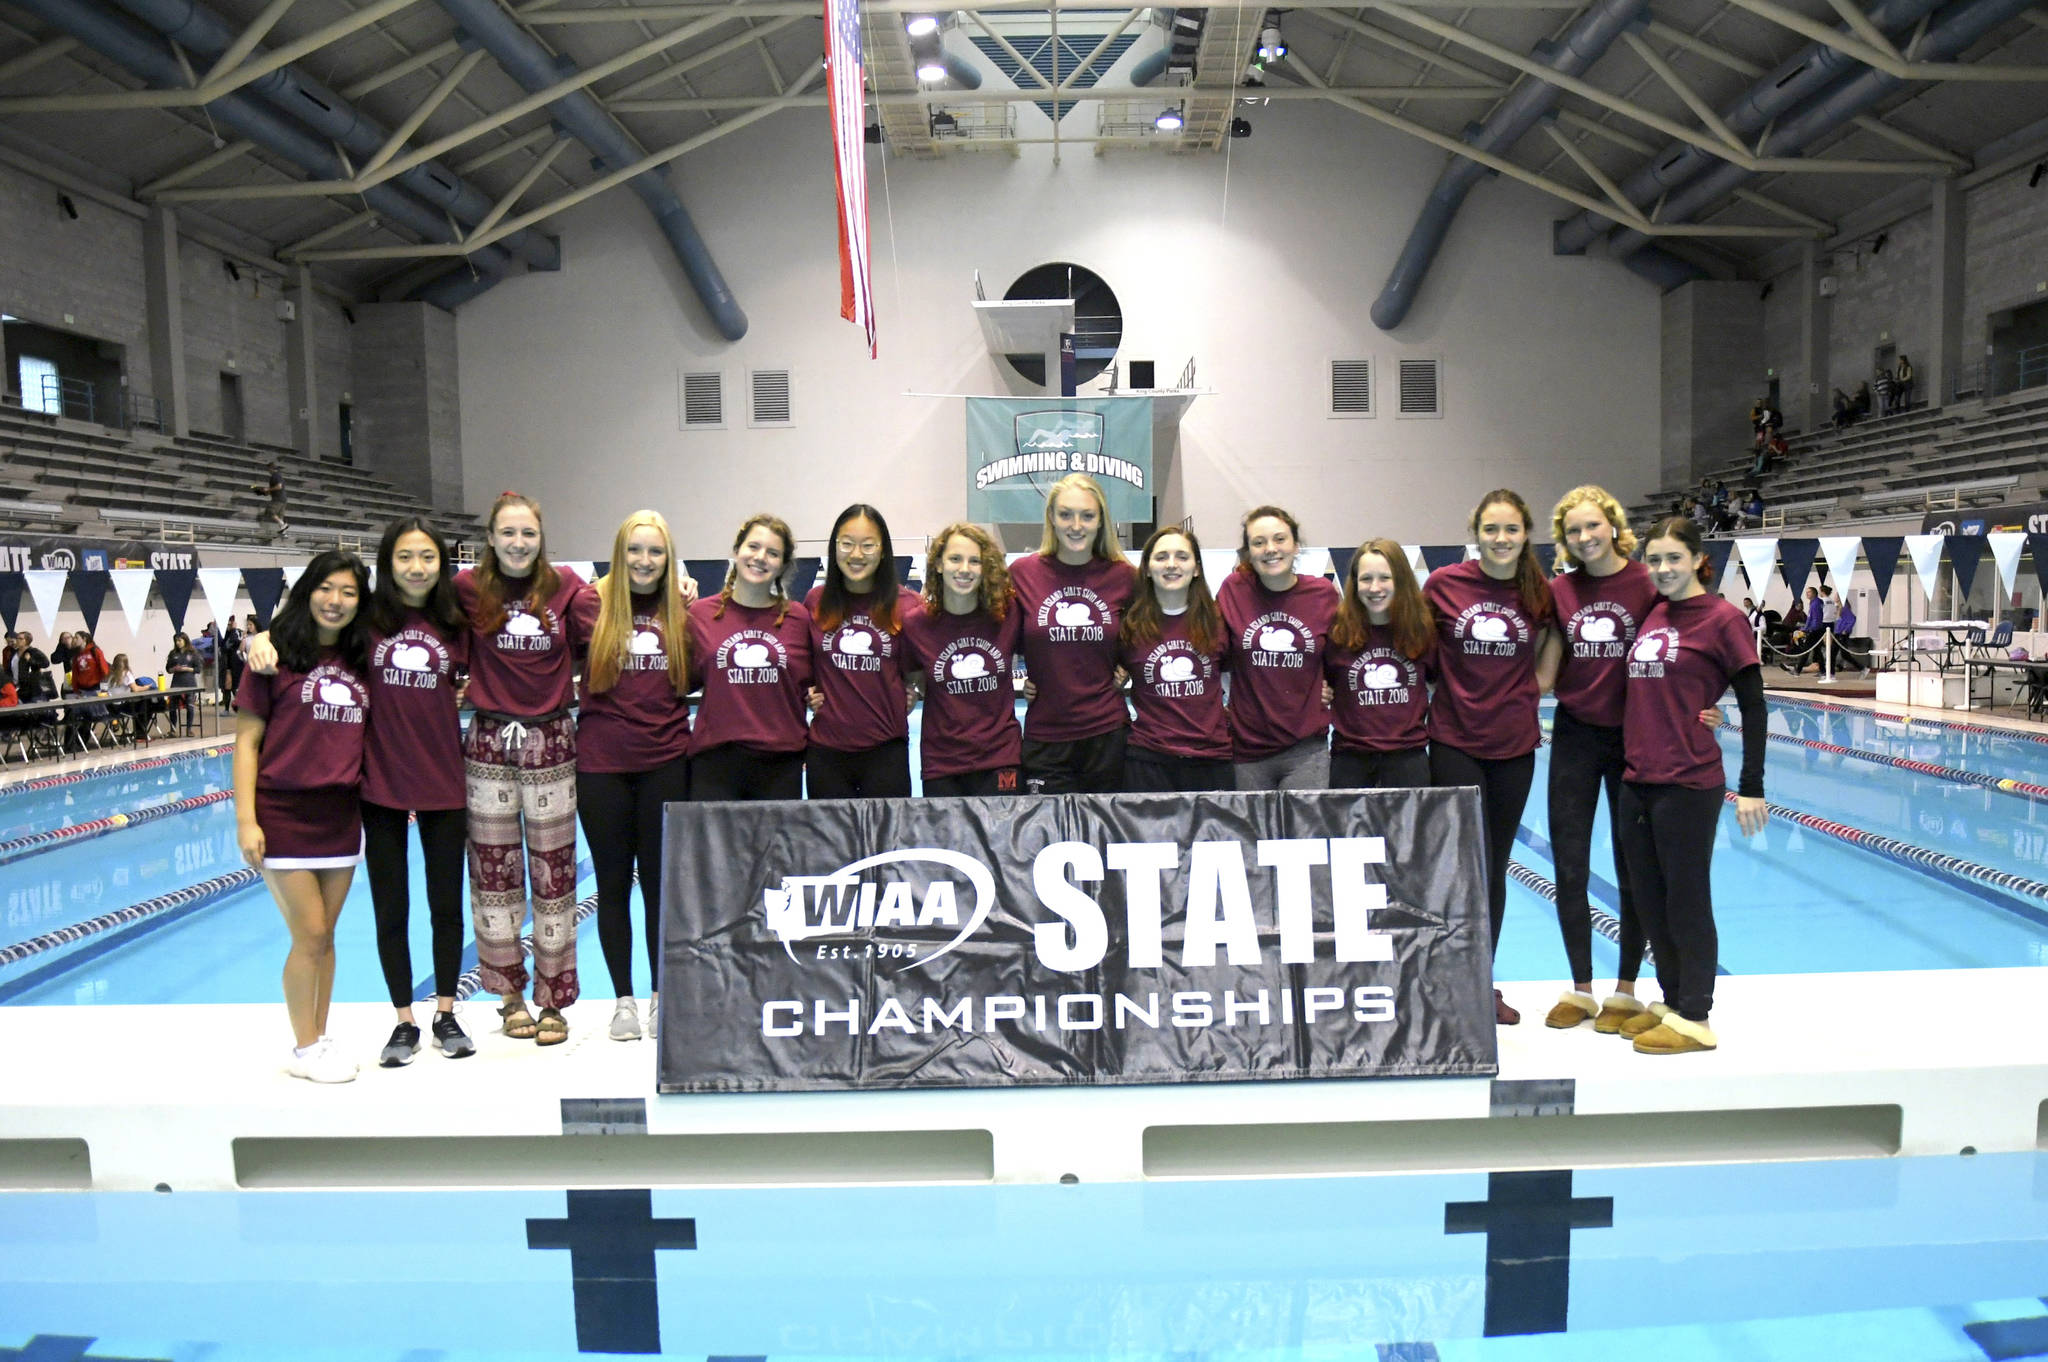 The Mercer Island Islanders girls swim team earned a fifth-place finish at the Class 3A state swim meet on Nov. 10 at the King County Aquatic Center in Federal Way.                                The 200 IM relay team consisting of Alexandra Williams, Grace Olsen, Cayla Prophater and Elie Bailey captured fifth place. The 200 free relay squad of Annie Pearse, Julia Williamson, Hailey Vandenbosch and Bailey finished in sixth place. The 400 free relay quartet of Pearse, Prophater, Vandenbosch and Williamson captured sixth place as well. Prophater earned fourth place in the 200 IM and third place in the 500 free. Sophia McGuffin registered a third-place finish in diving and Pearse finished in fifth place in the 100 free. Photo courtesy of Allison Nelson